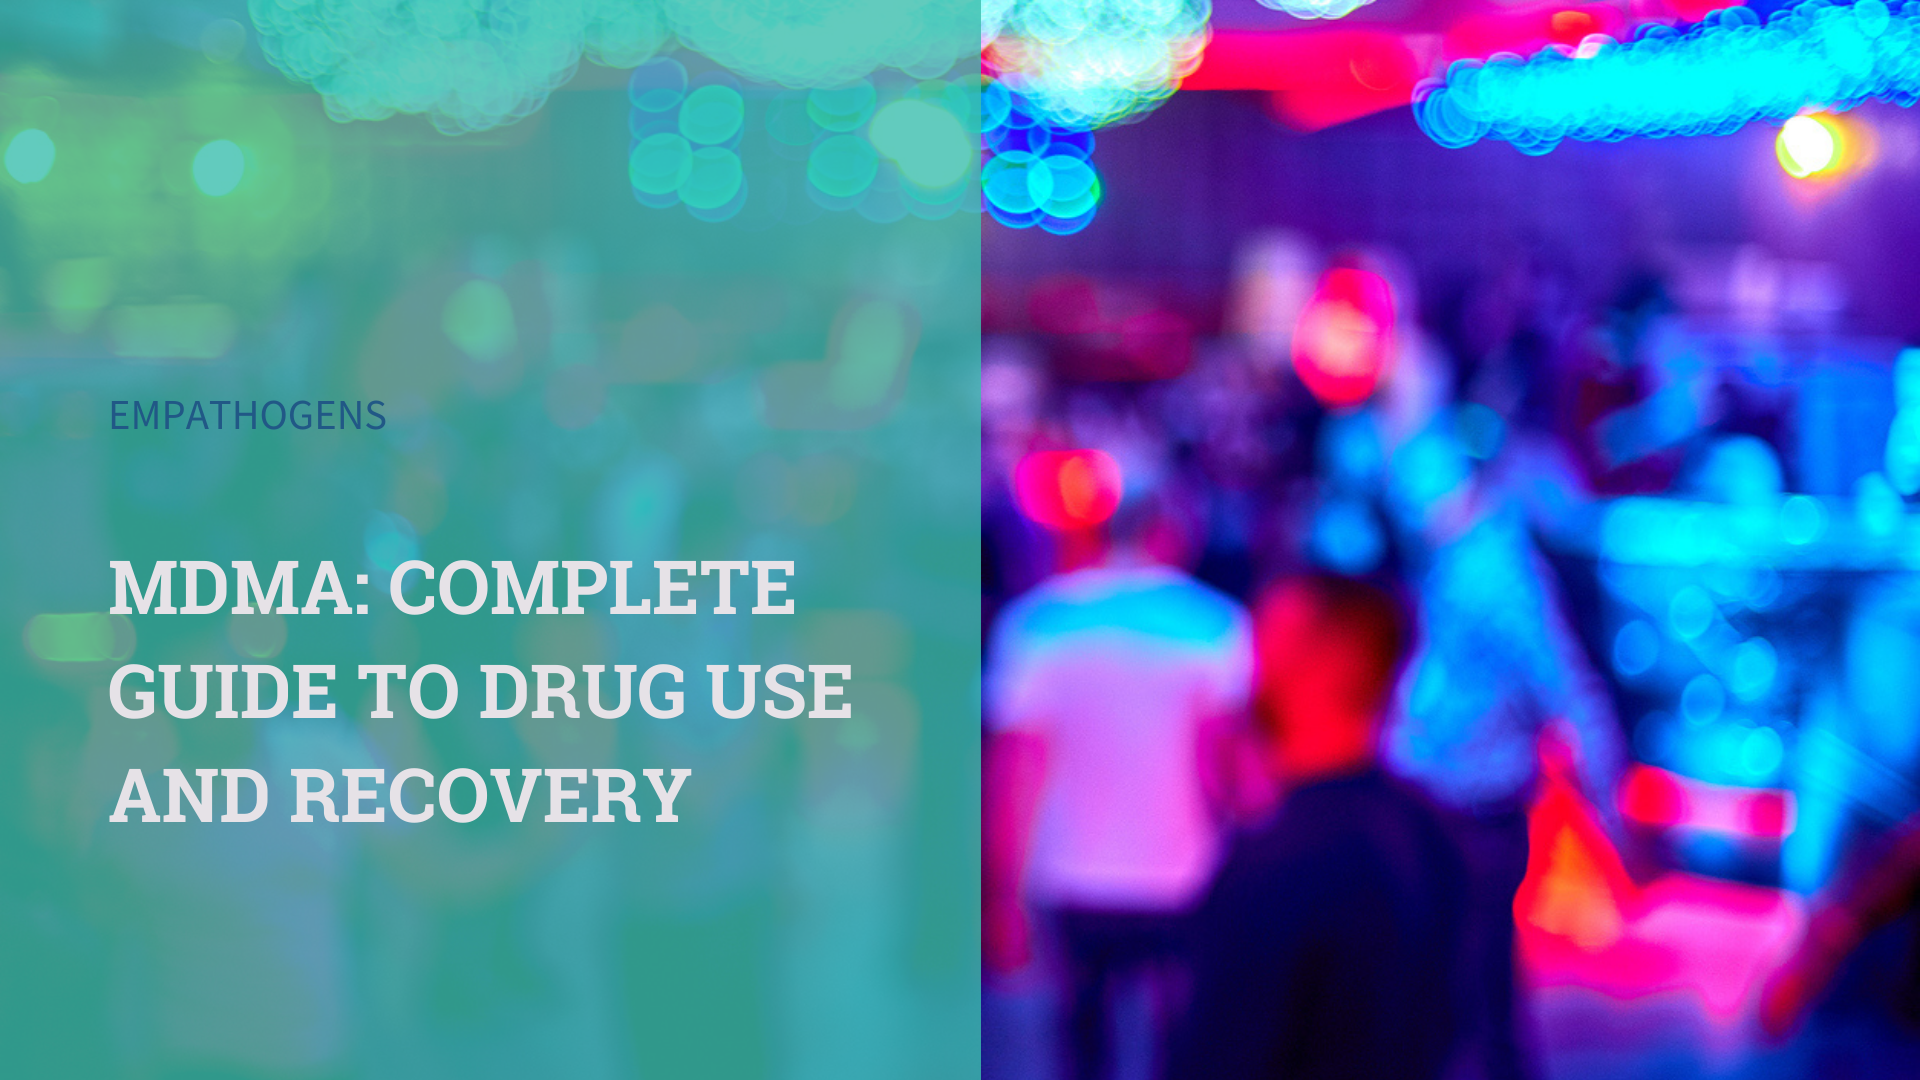 MDMA Complete Guide to Drug Use and Recovery